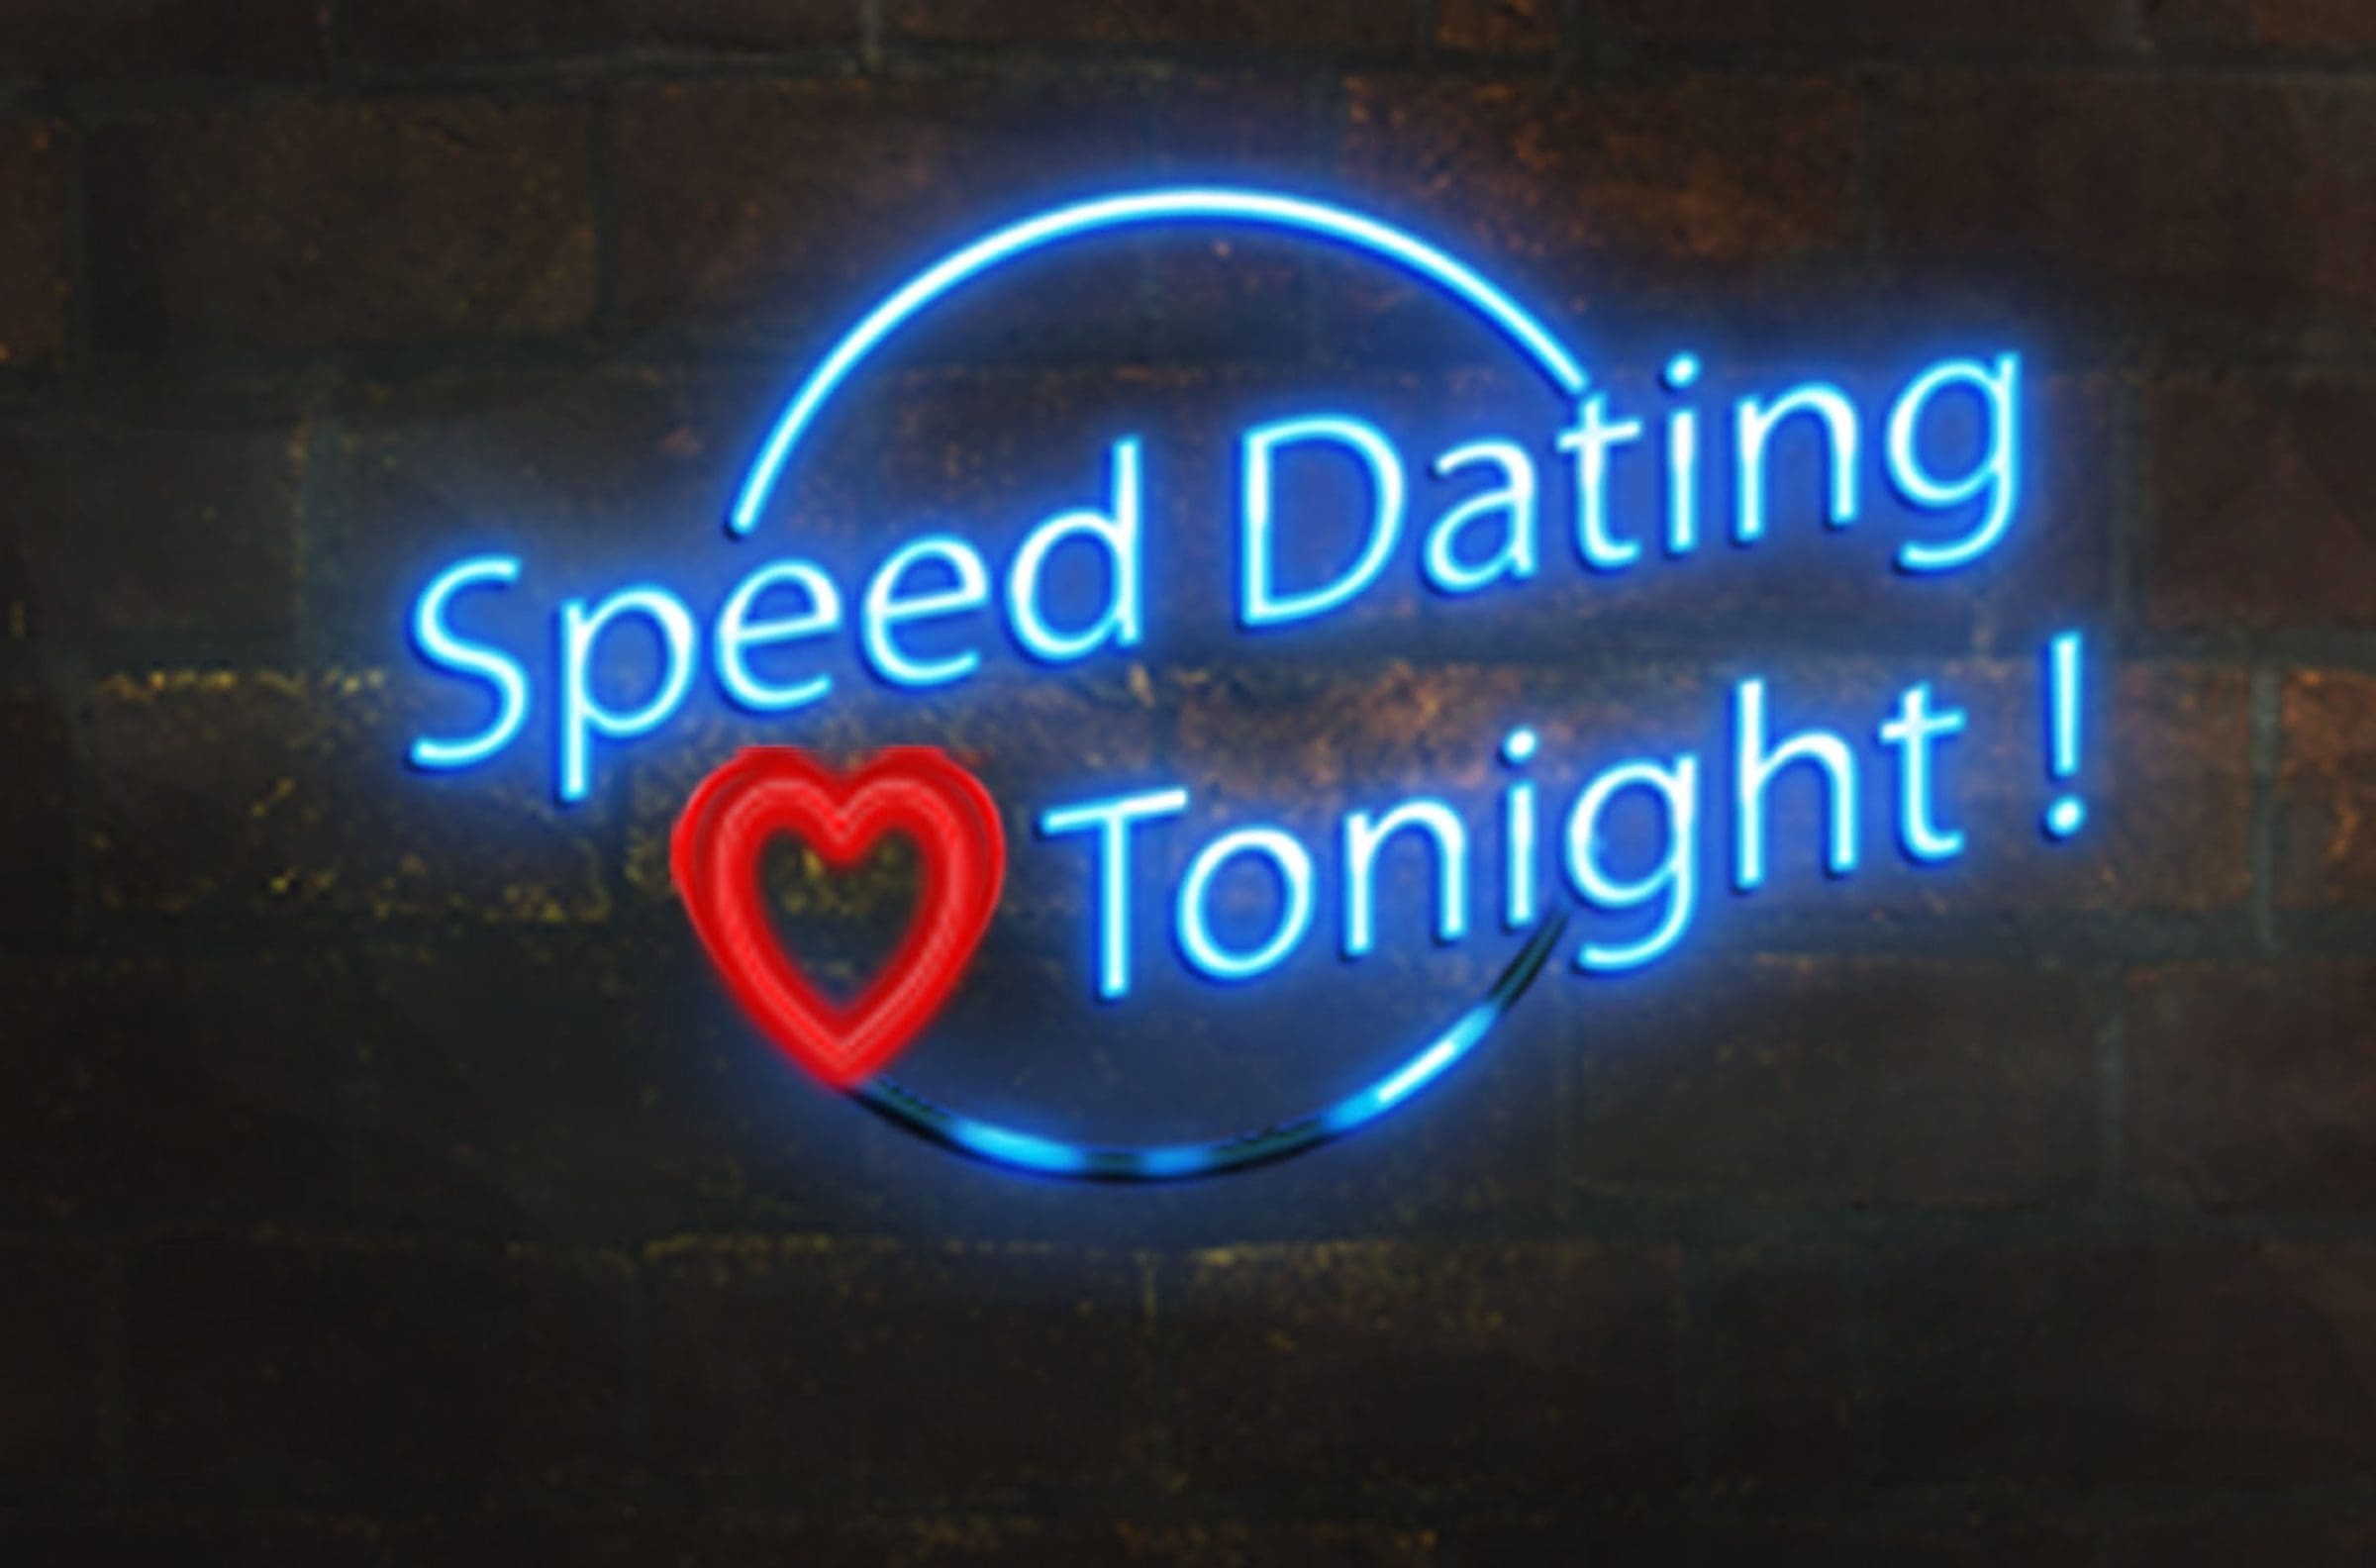 single speed dating new york minute cast